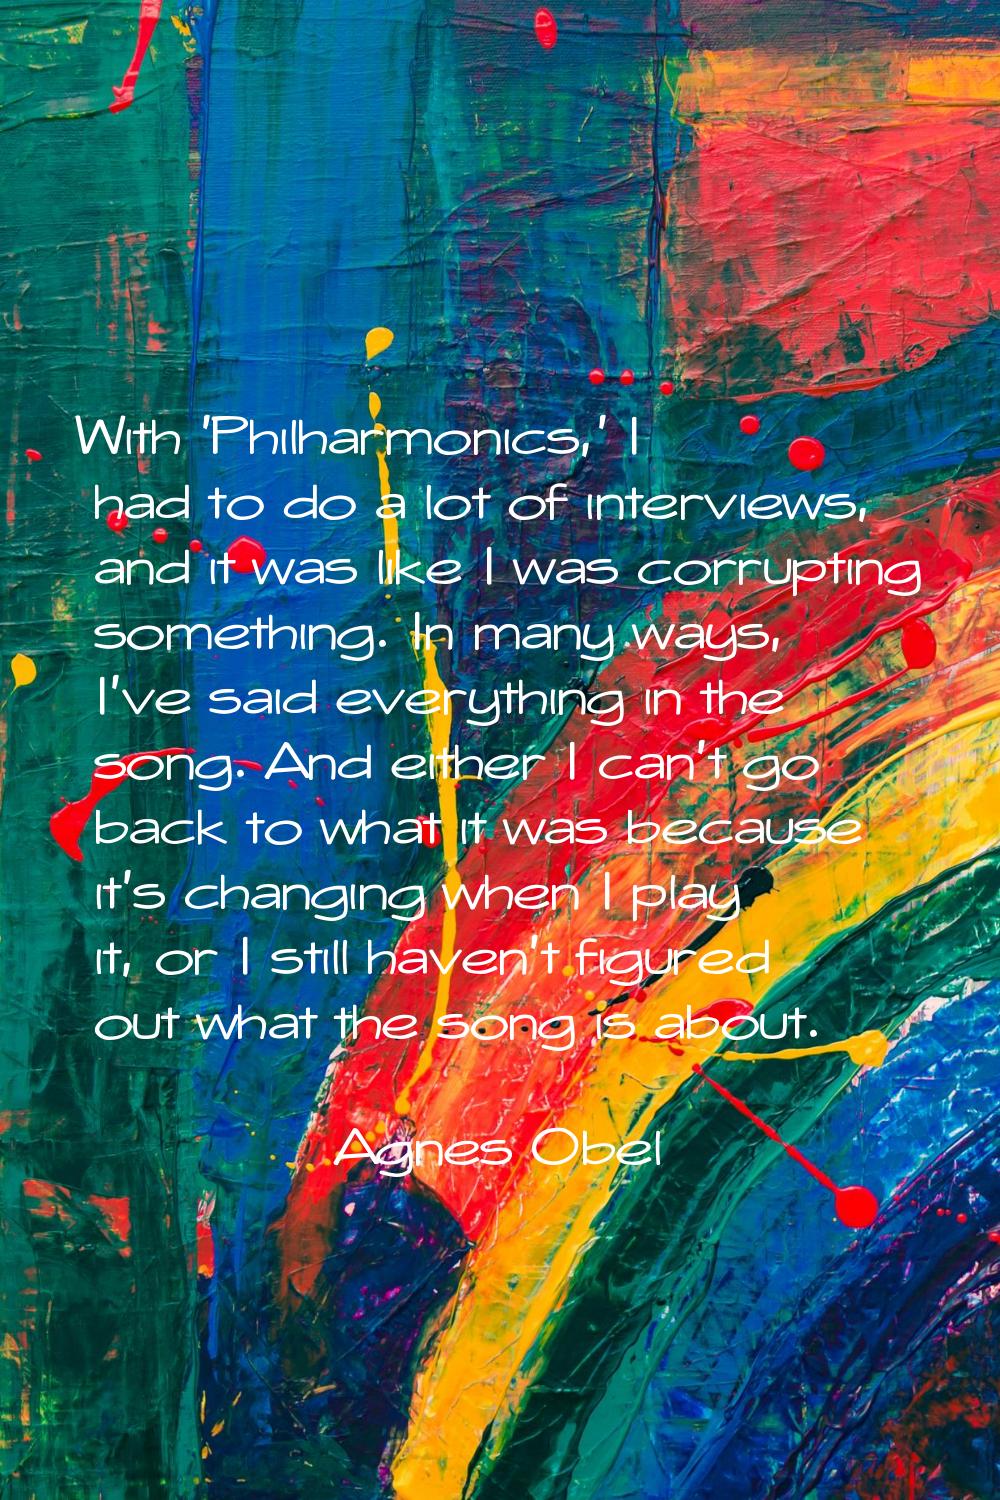 With 'Philharmonics,' I had to do a lot of interviews, and it was like I was corrupting something. 